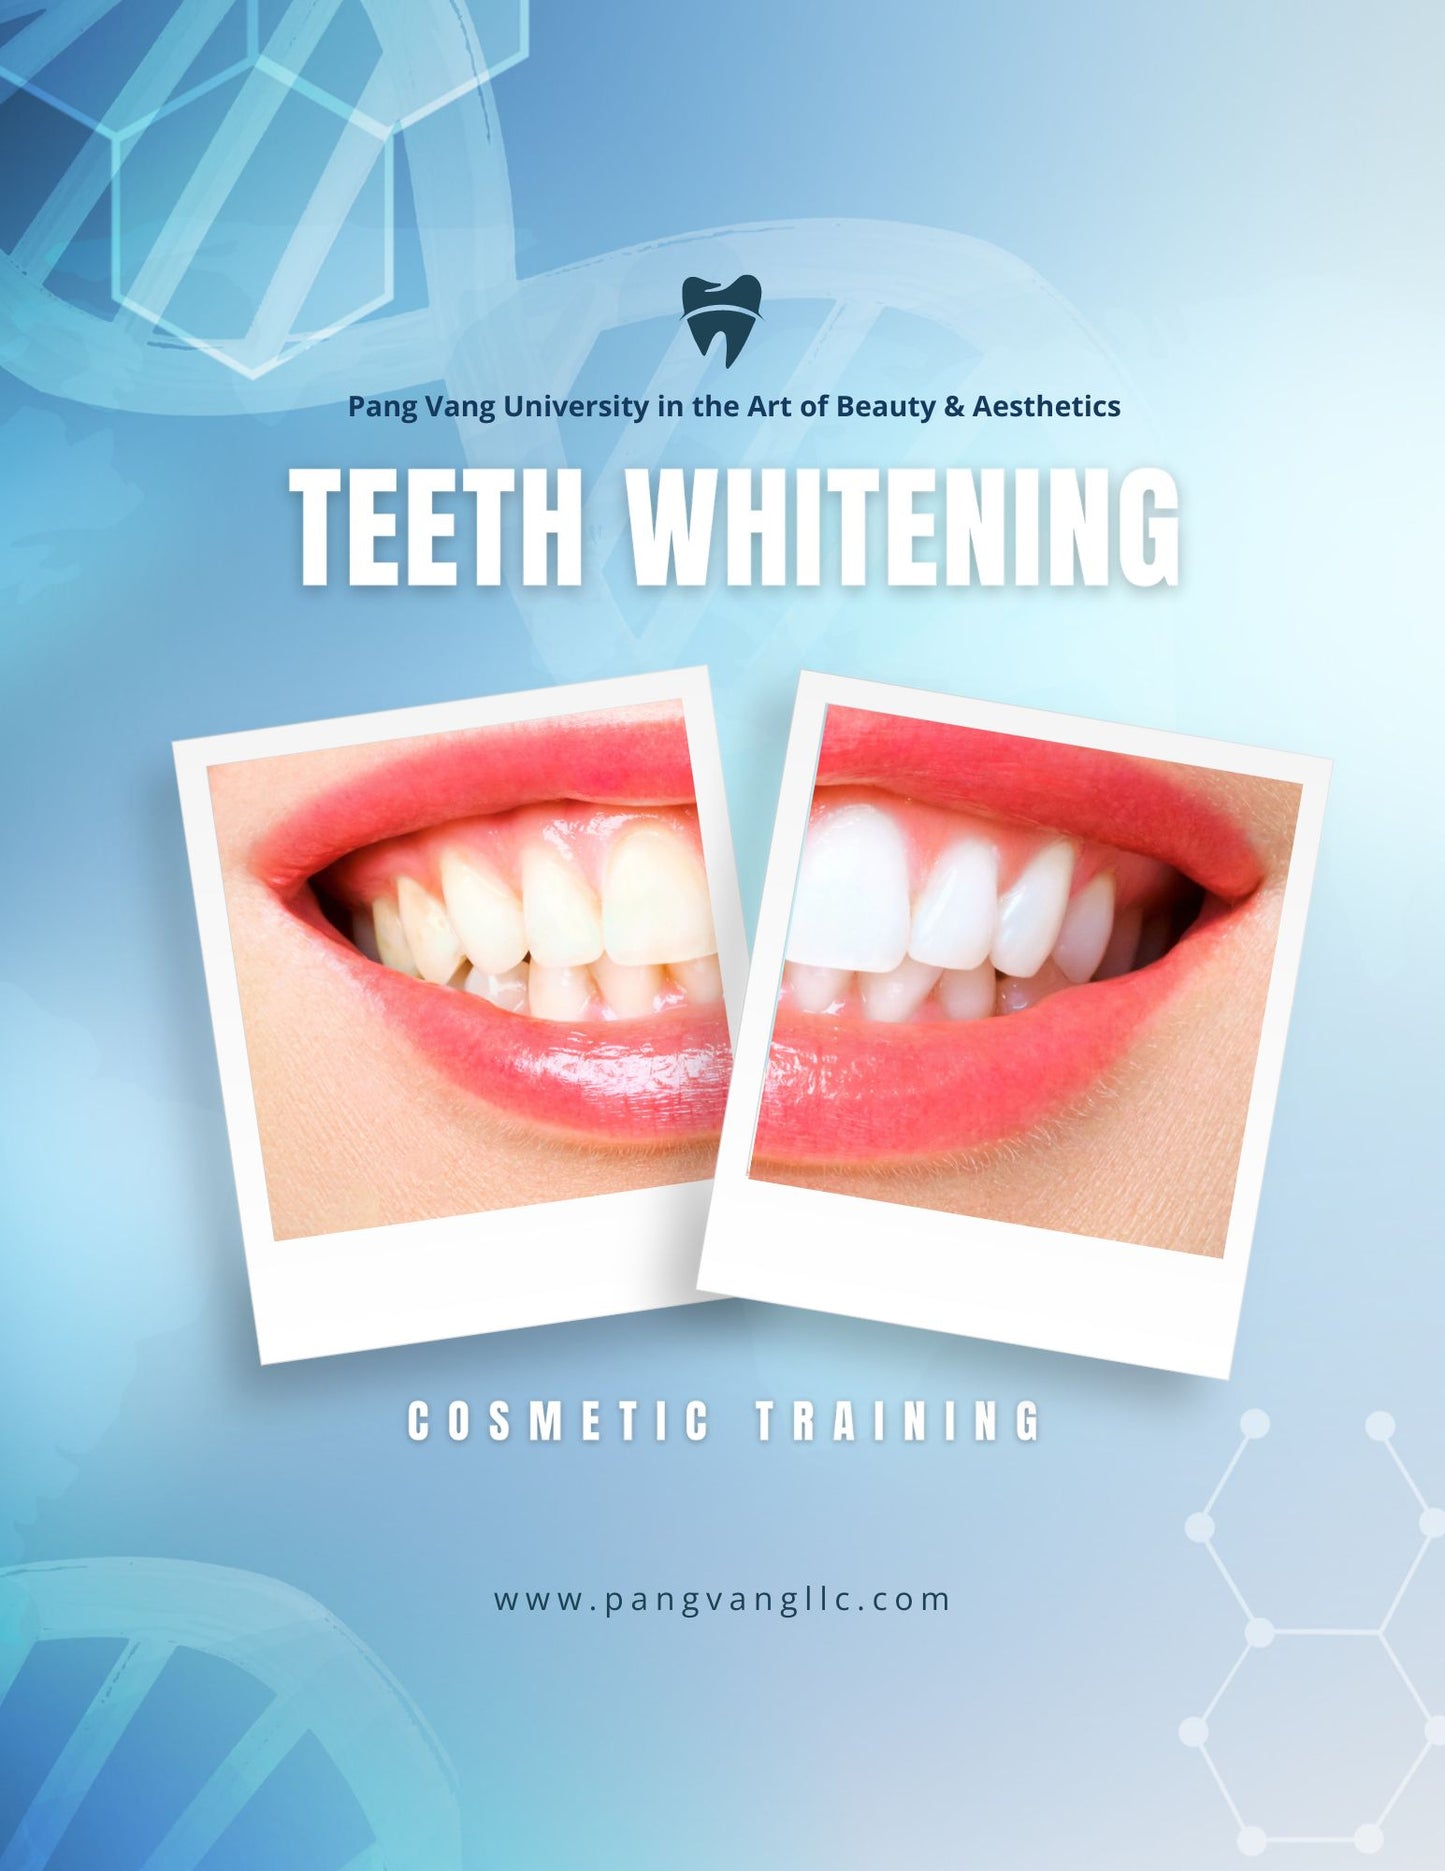 Teeth Whitening Online Training Includes Digital Manual* with KIT